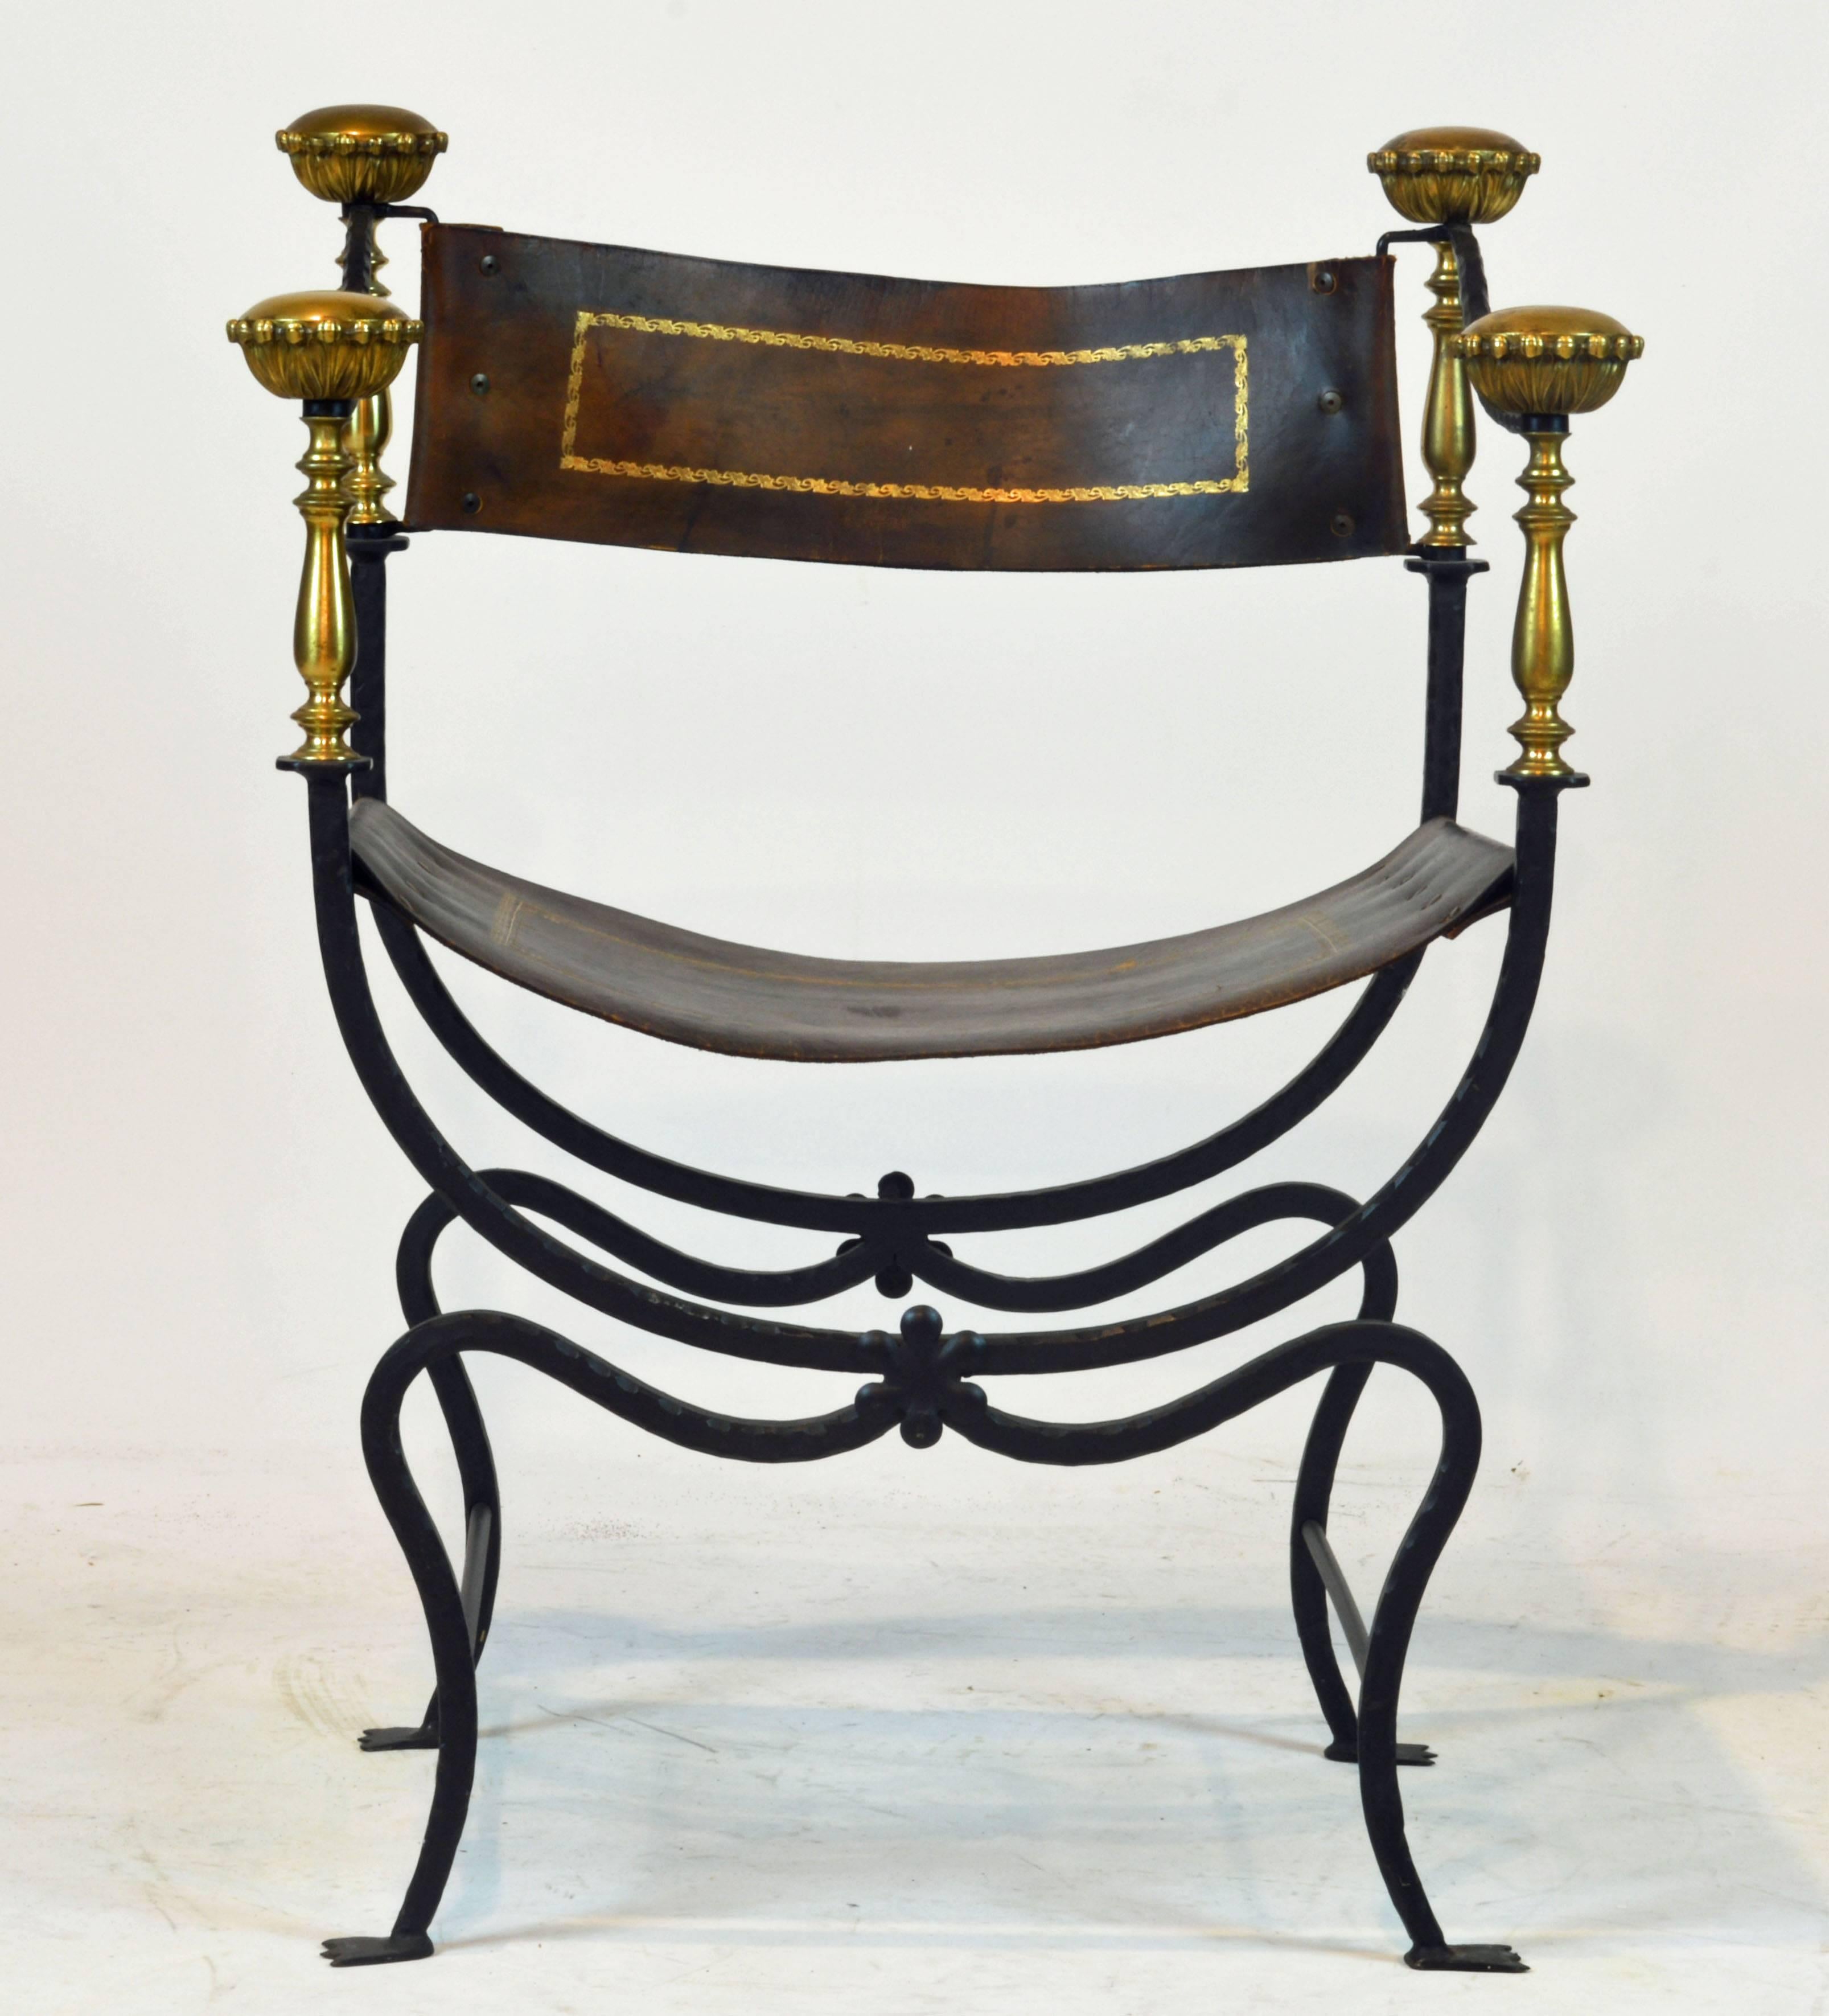 Of iconic Mediterranean design this Italian Savonarola chair features a tooled wrought frame supporting polished bronze baluster verticals surmounted by round archantus grips. The chair retains its original gilt tooled leather seat and backrest.